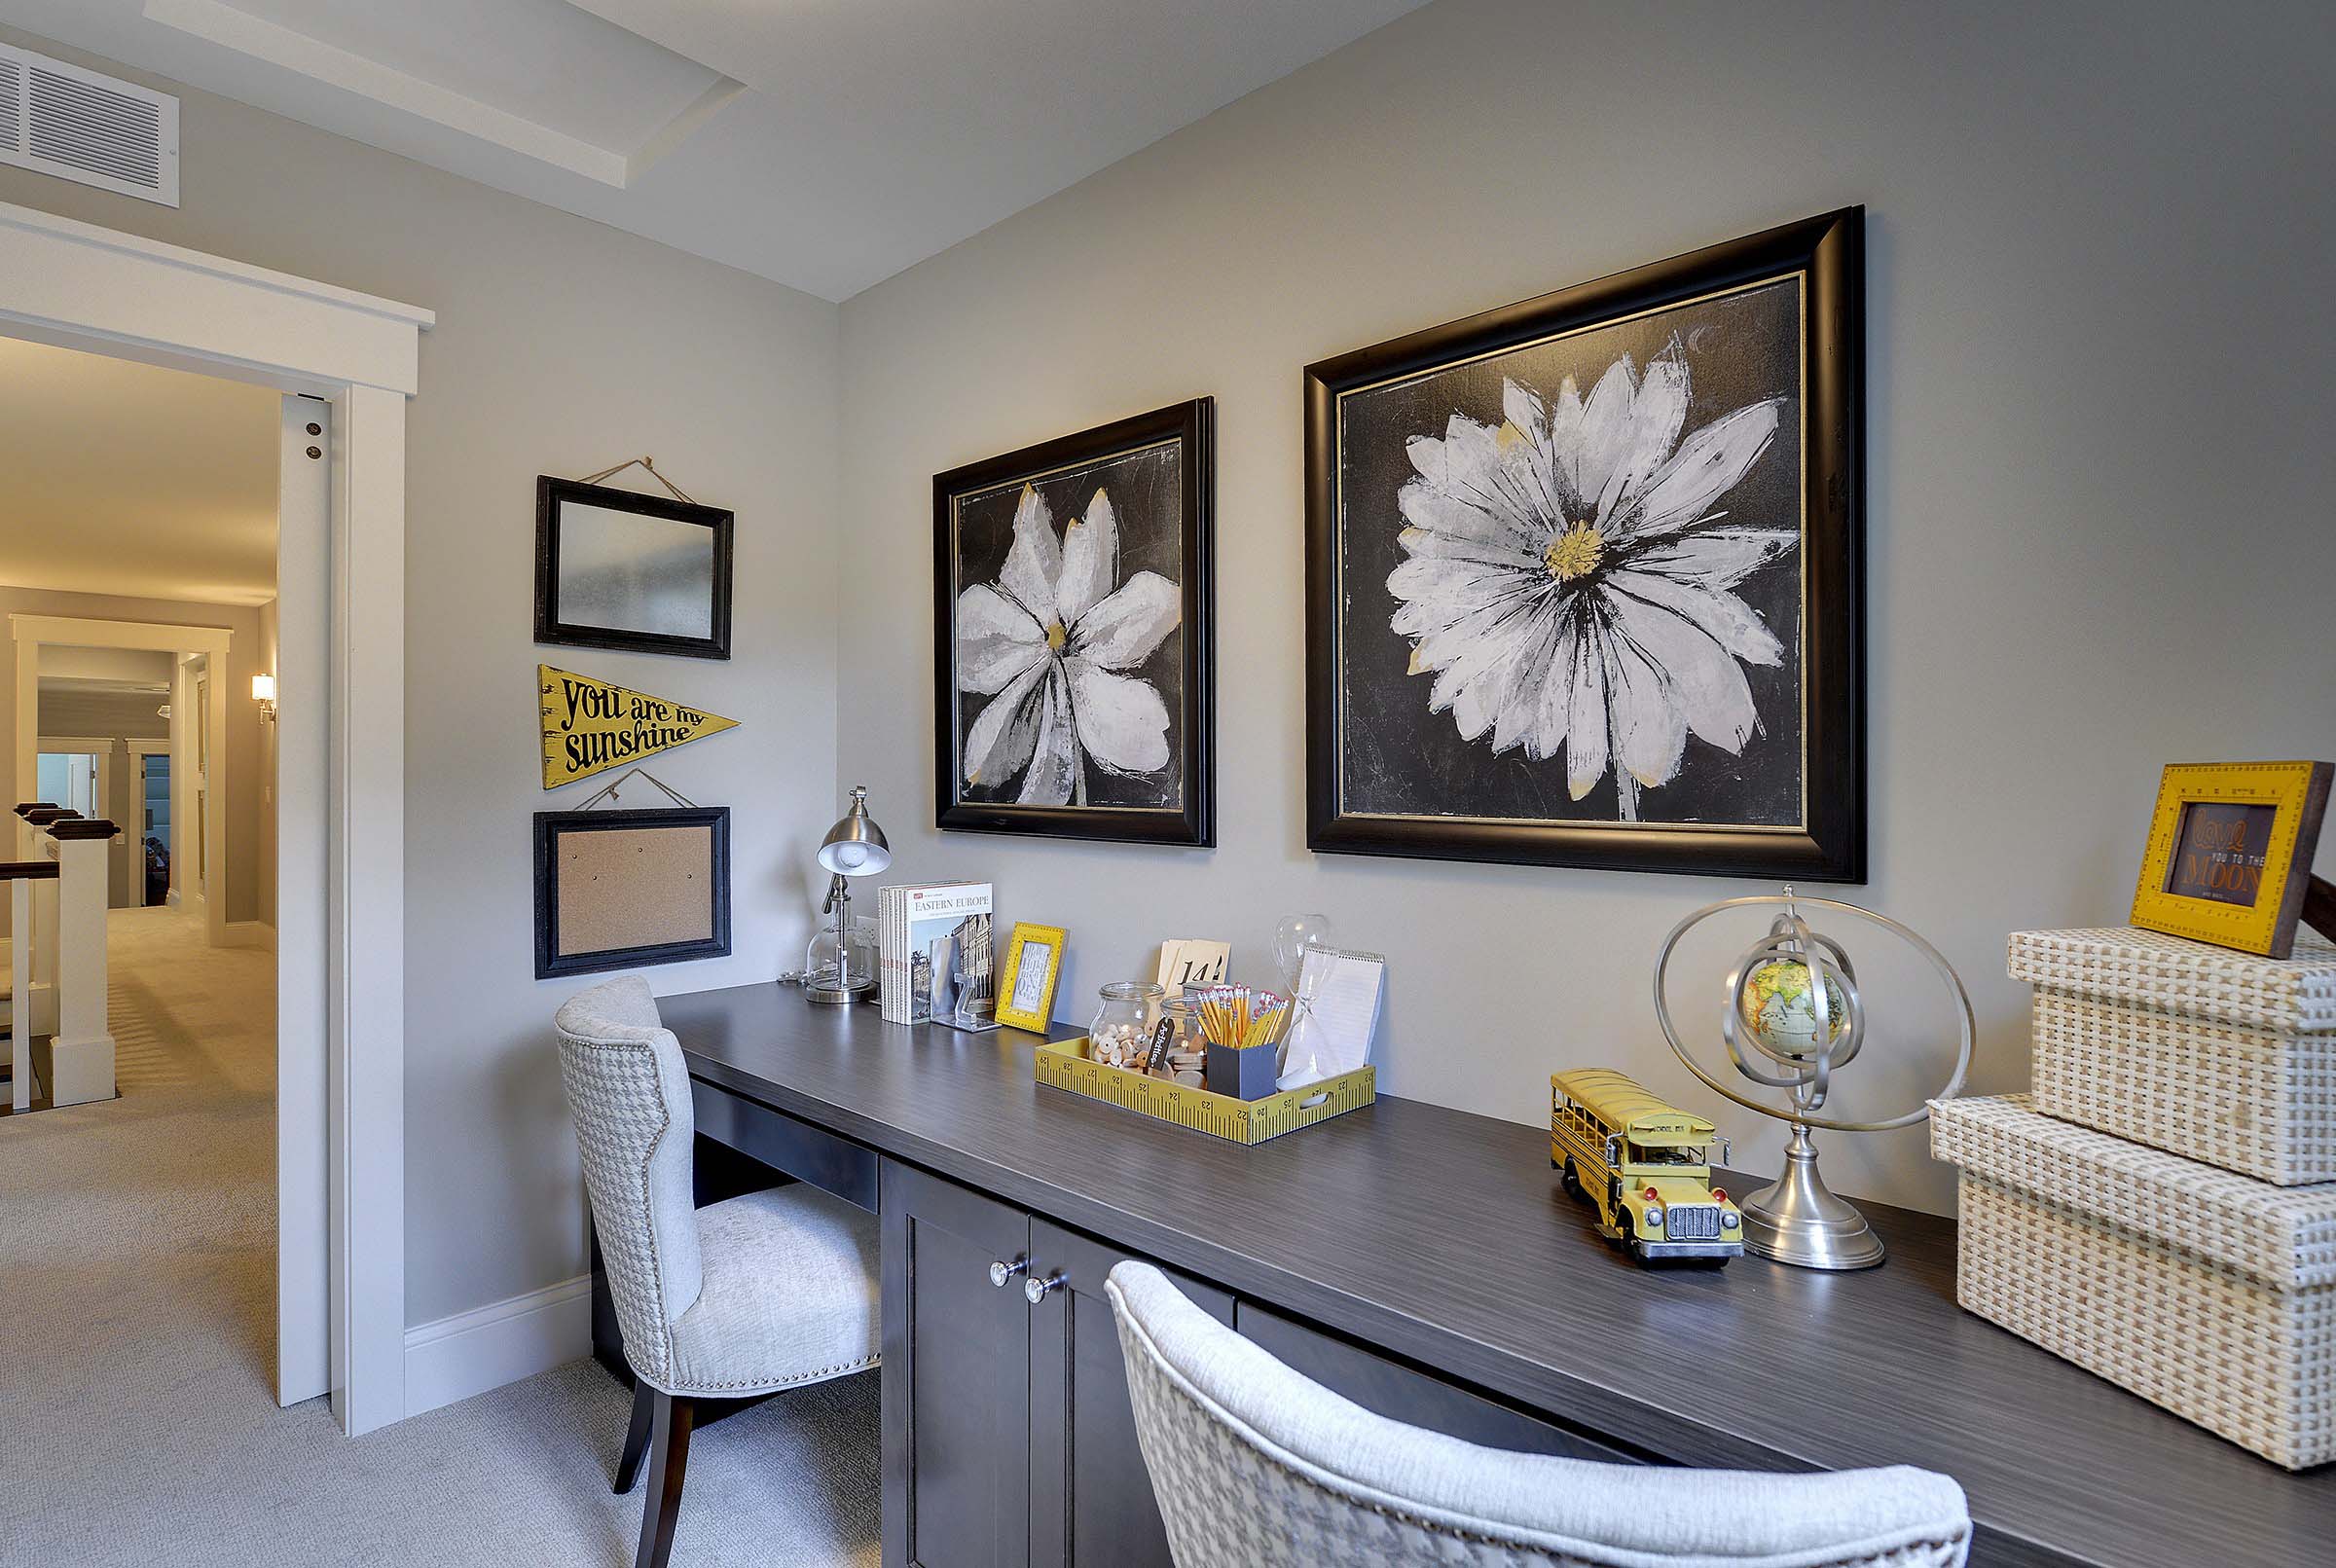 A home office with a desk and framed pictures.